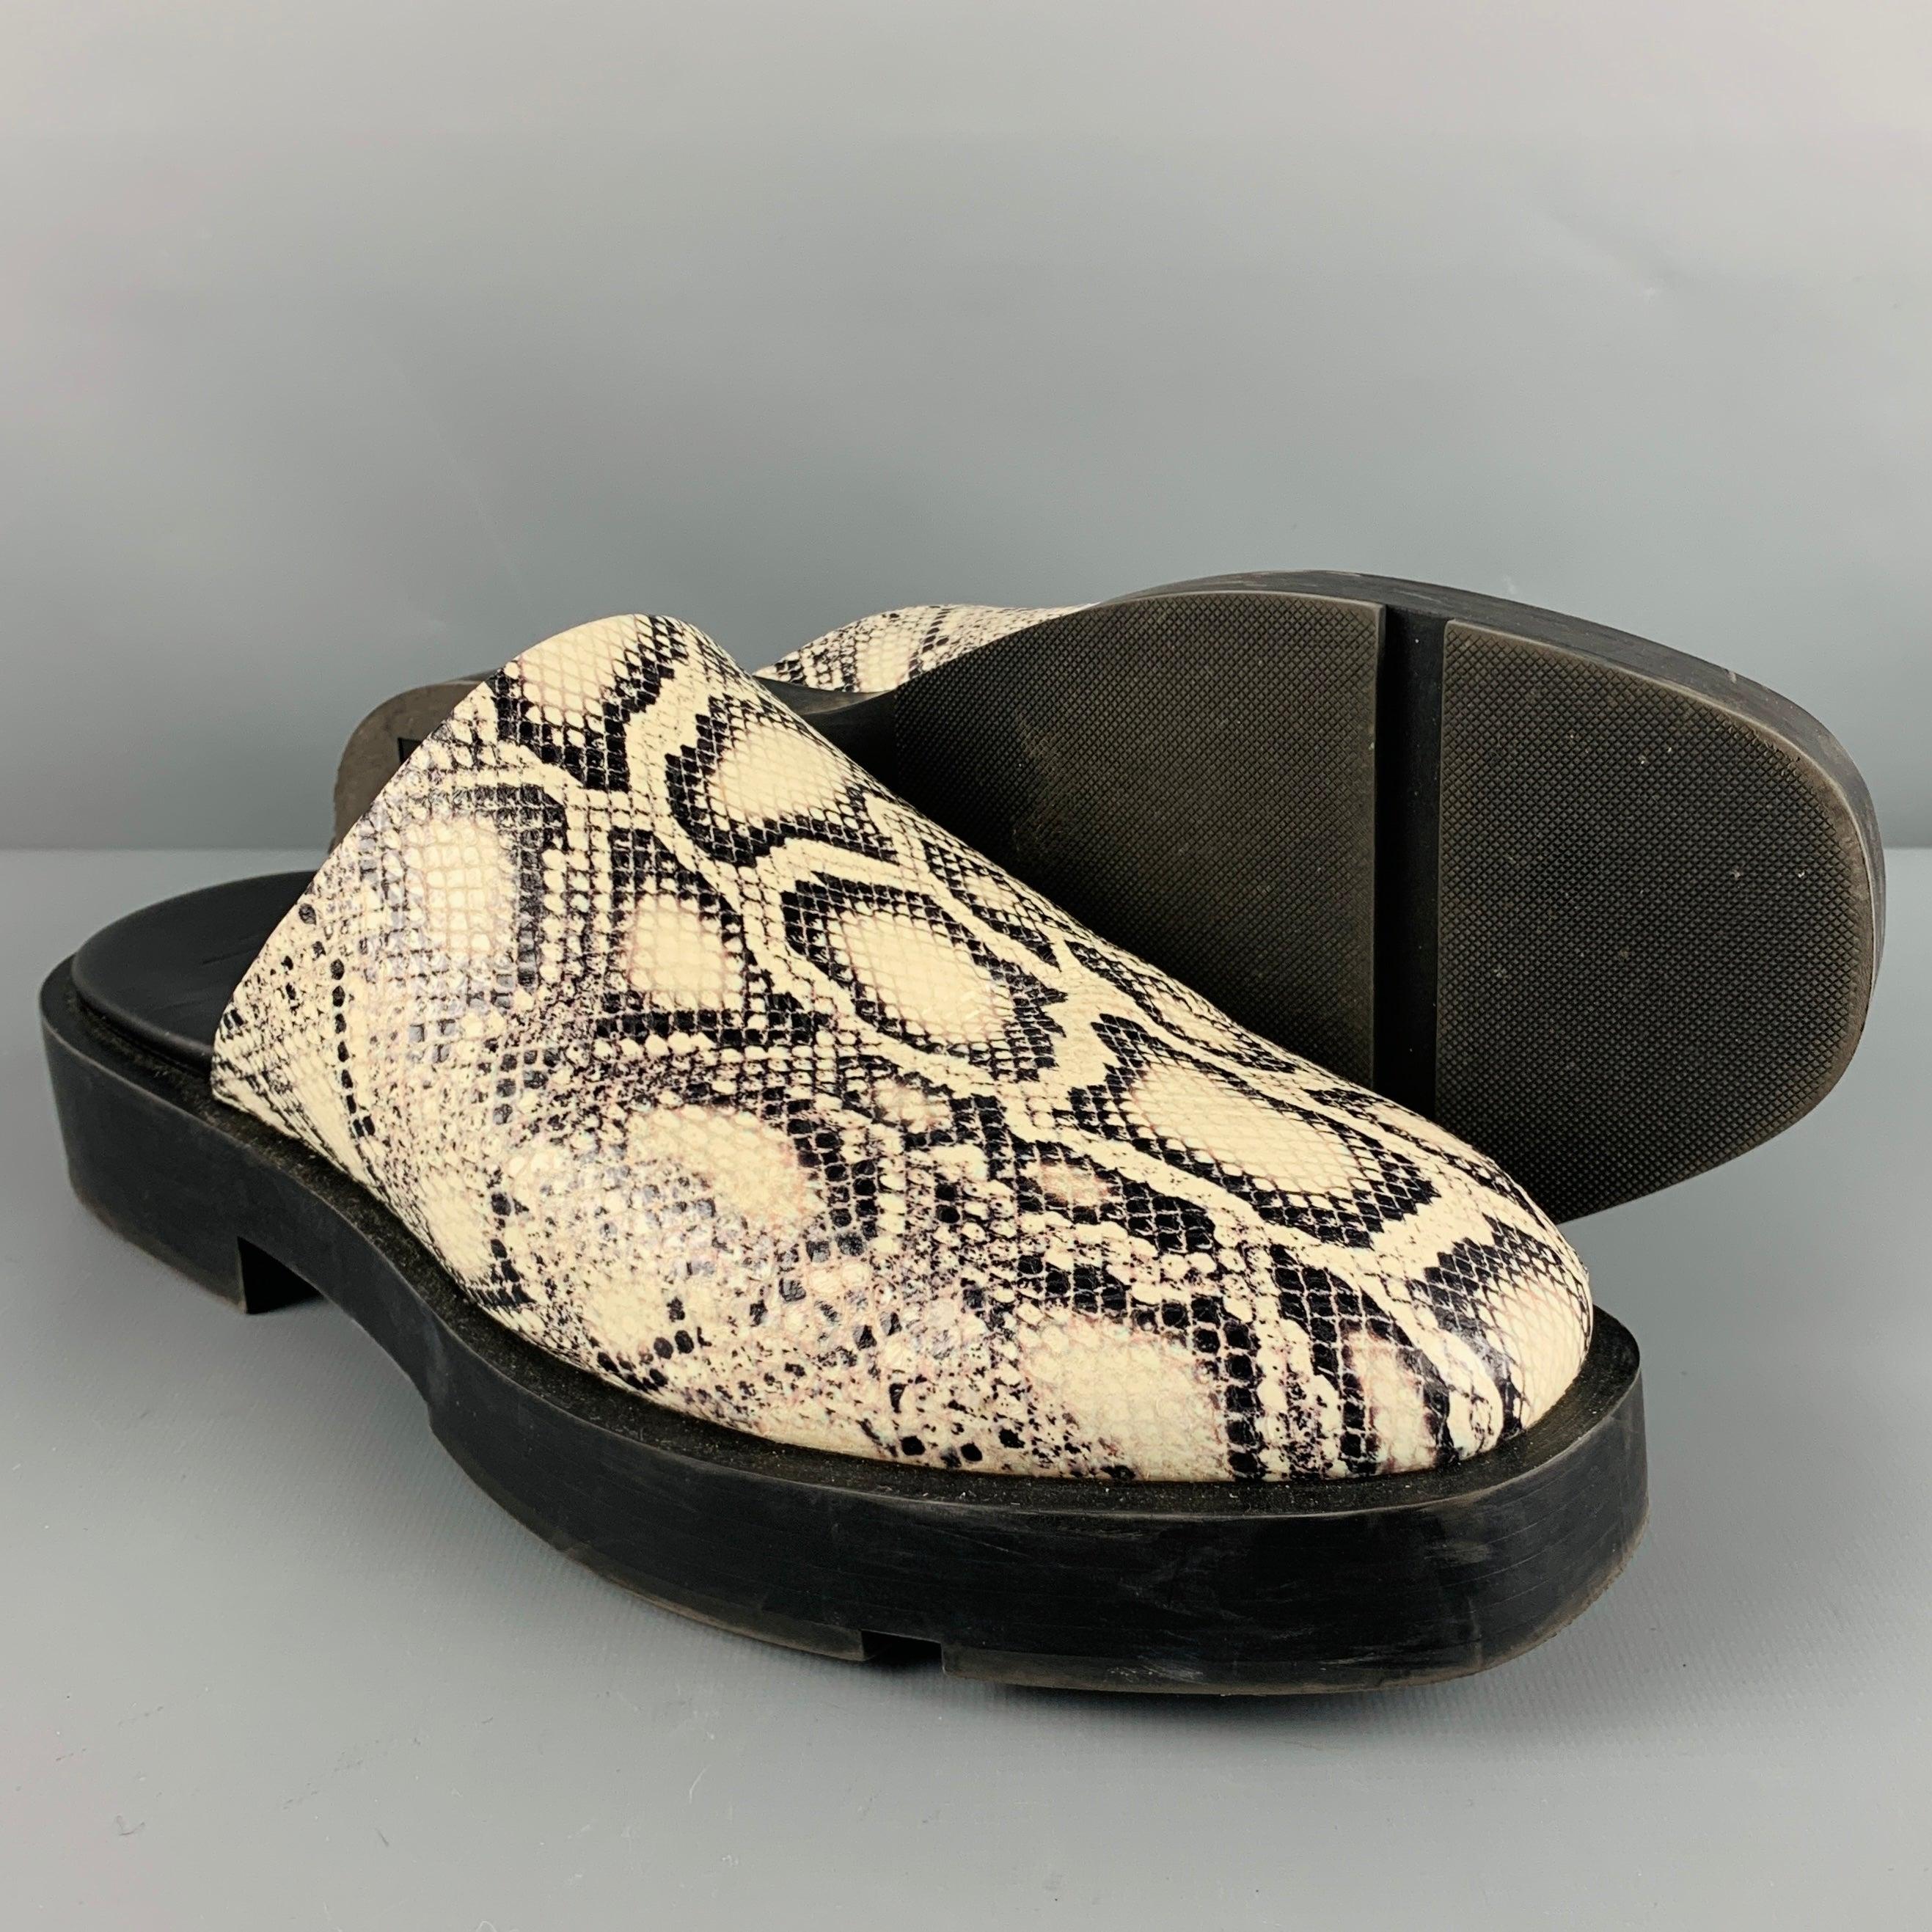 GIVENCHY Size 11 Black White Snake Print Leather Slip On Loafers For Sale 1